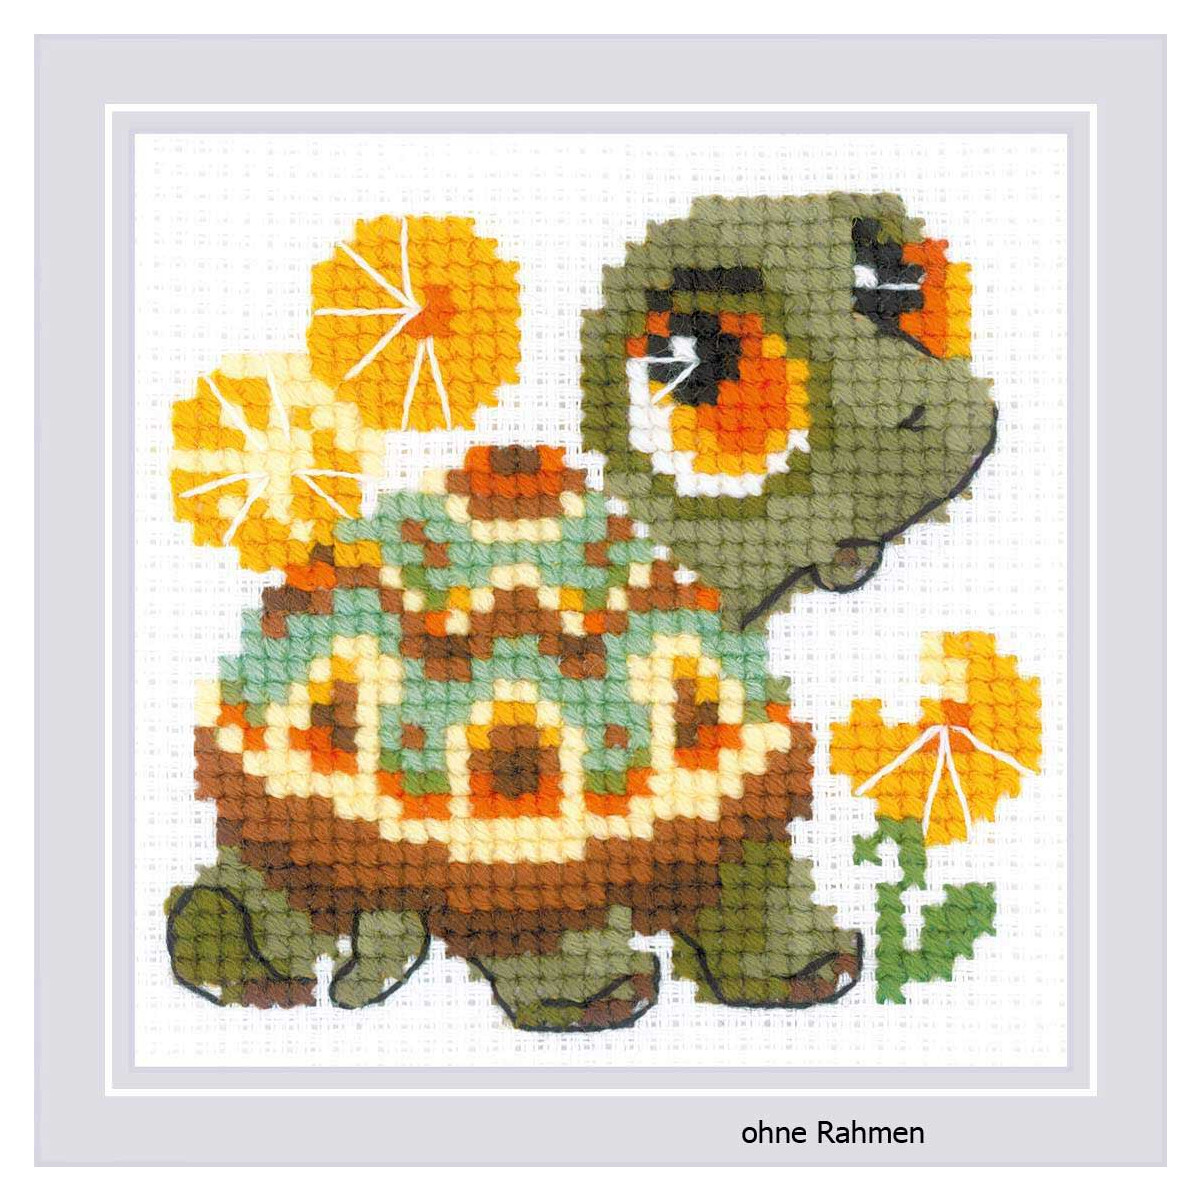 Riolis counted cross stitch Kit Little Turtle, DIY